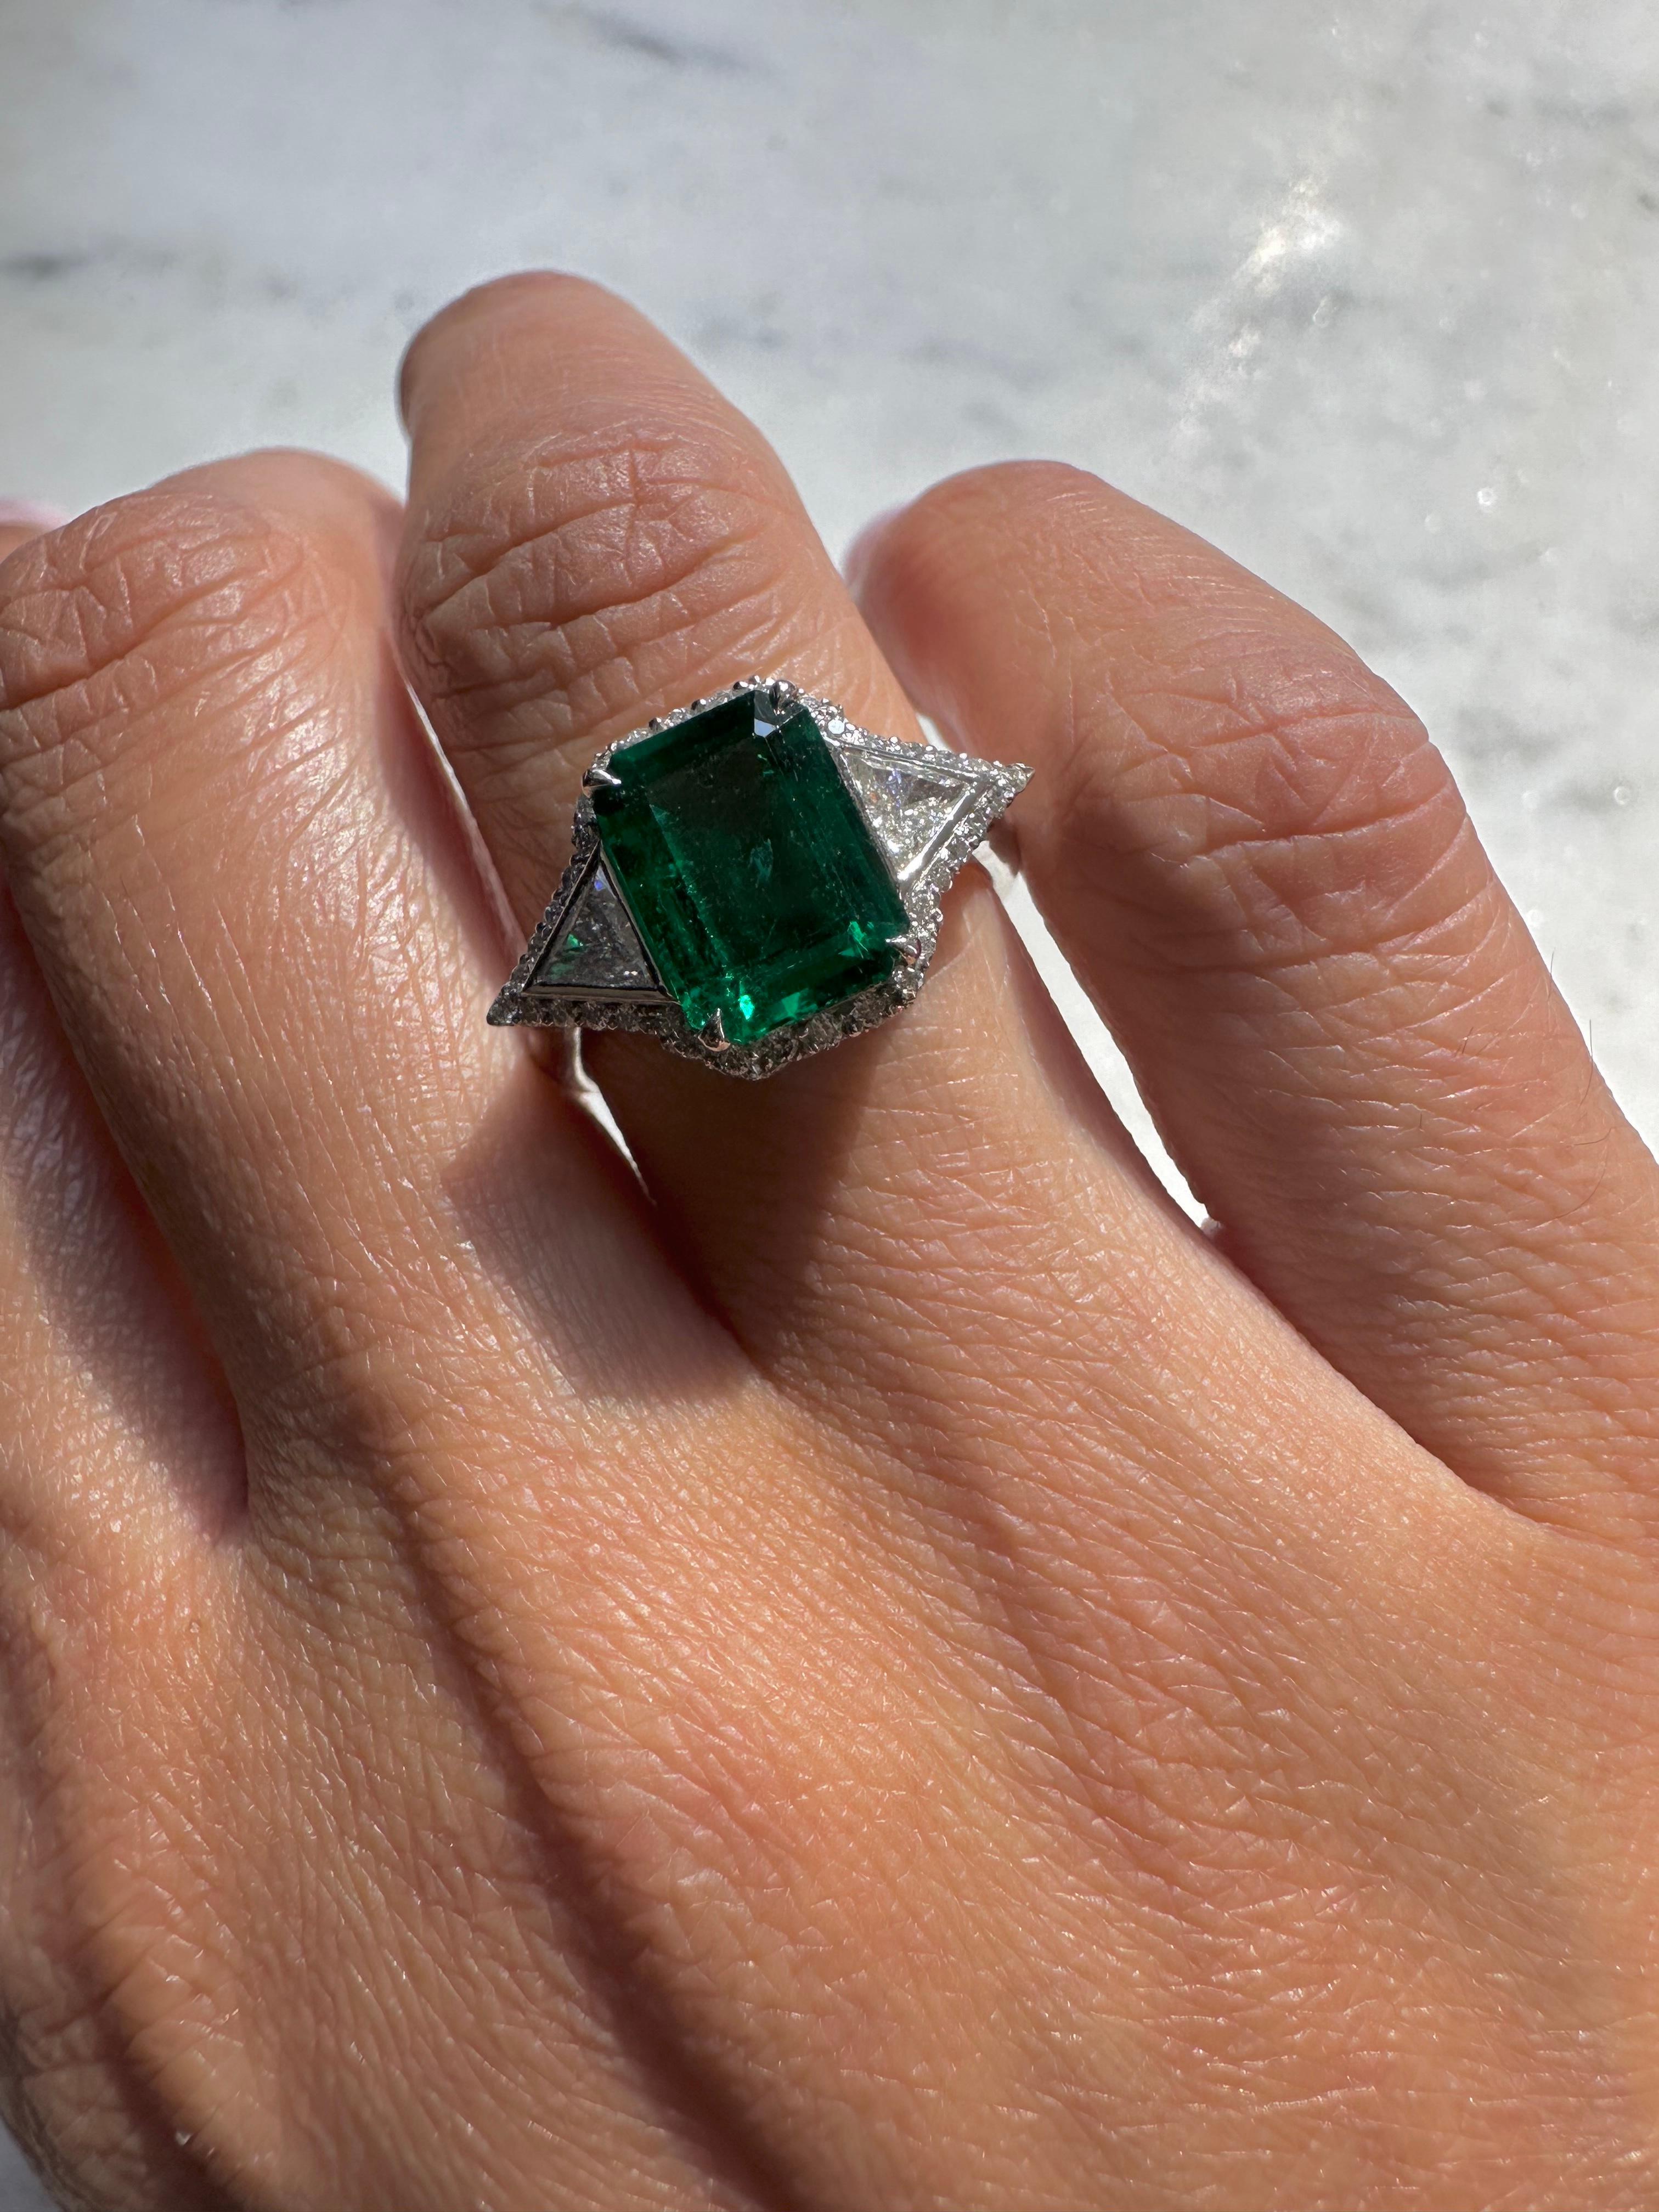 This unique ring is Art Deco inspired, while maintaining a strikingly modern feel.
 
The 2.57 carat Zambian emerald has a vibrant green color. It is low oil certified by AGL.

The emerald is set between two GH VS+ trillion diamonds. The entire shape